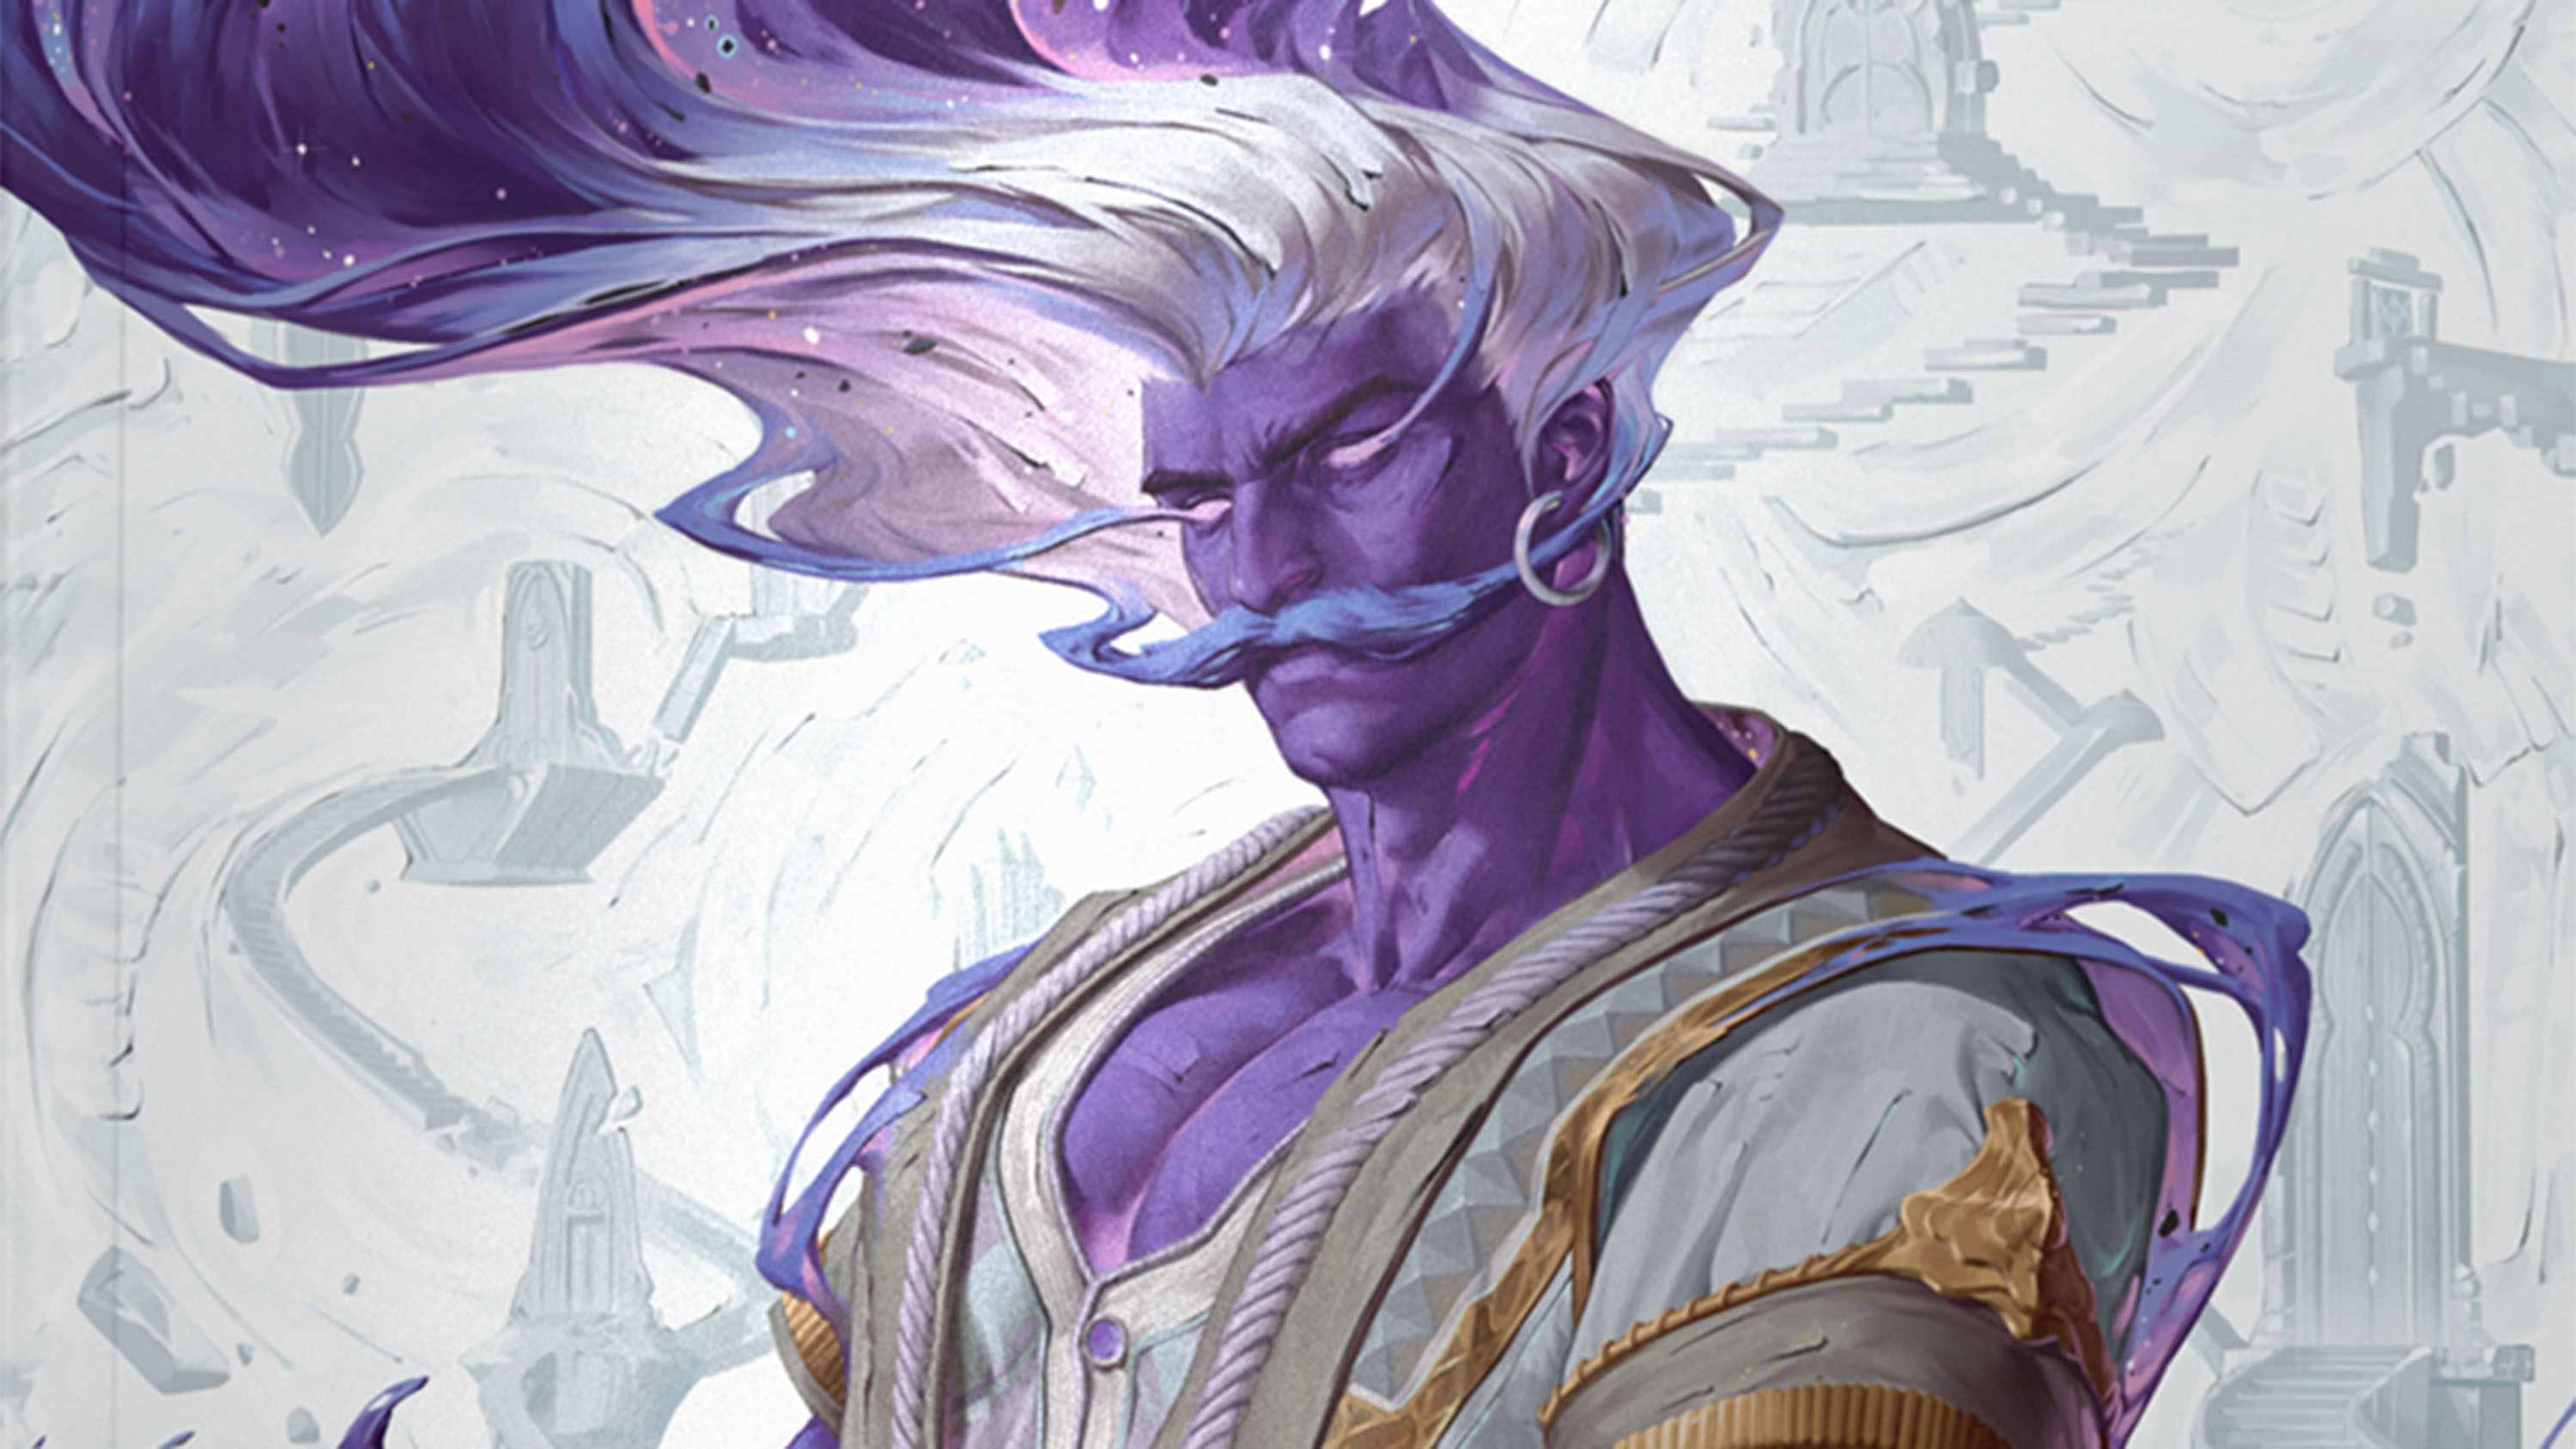 Alternate art for Quests from the Infinite Staircase features a powerful spirit with purple skin and white hair.